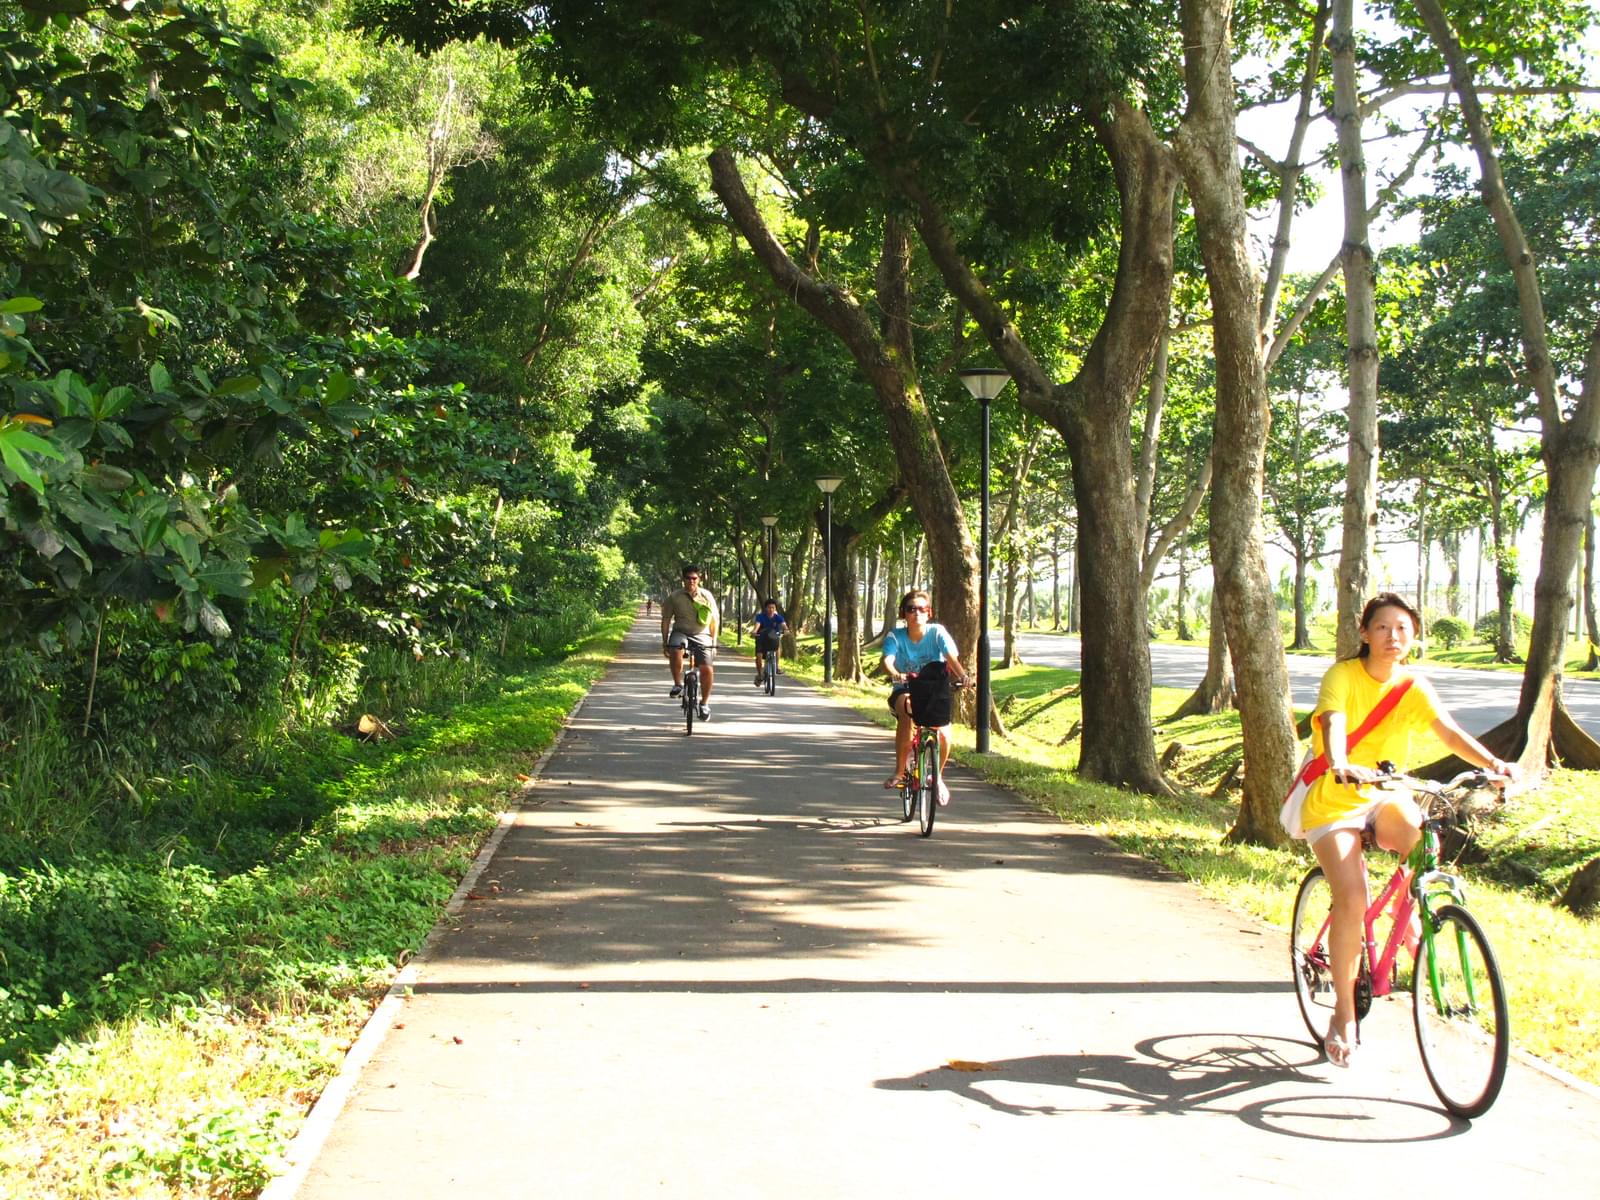 Enjoy cycling with your family in the park